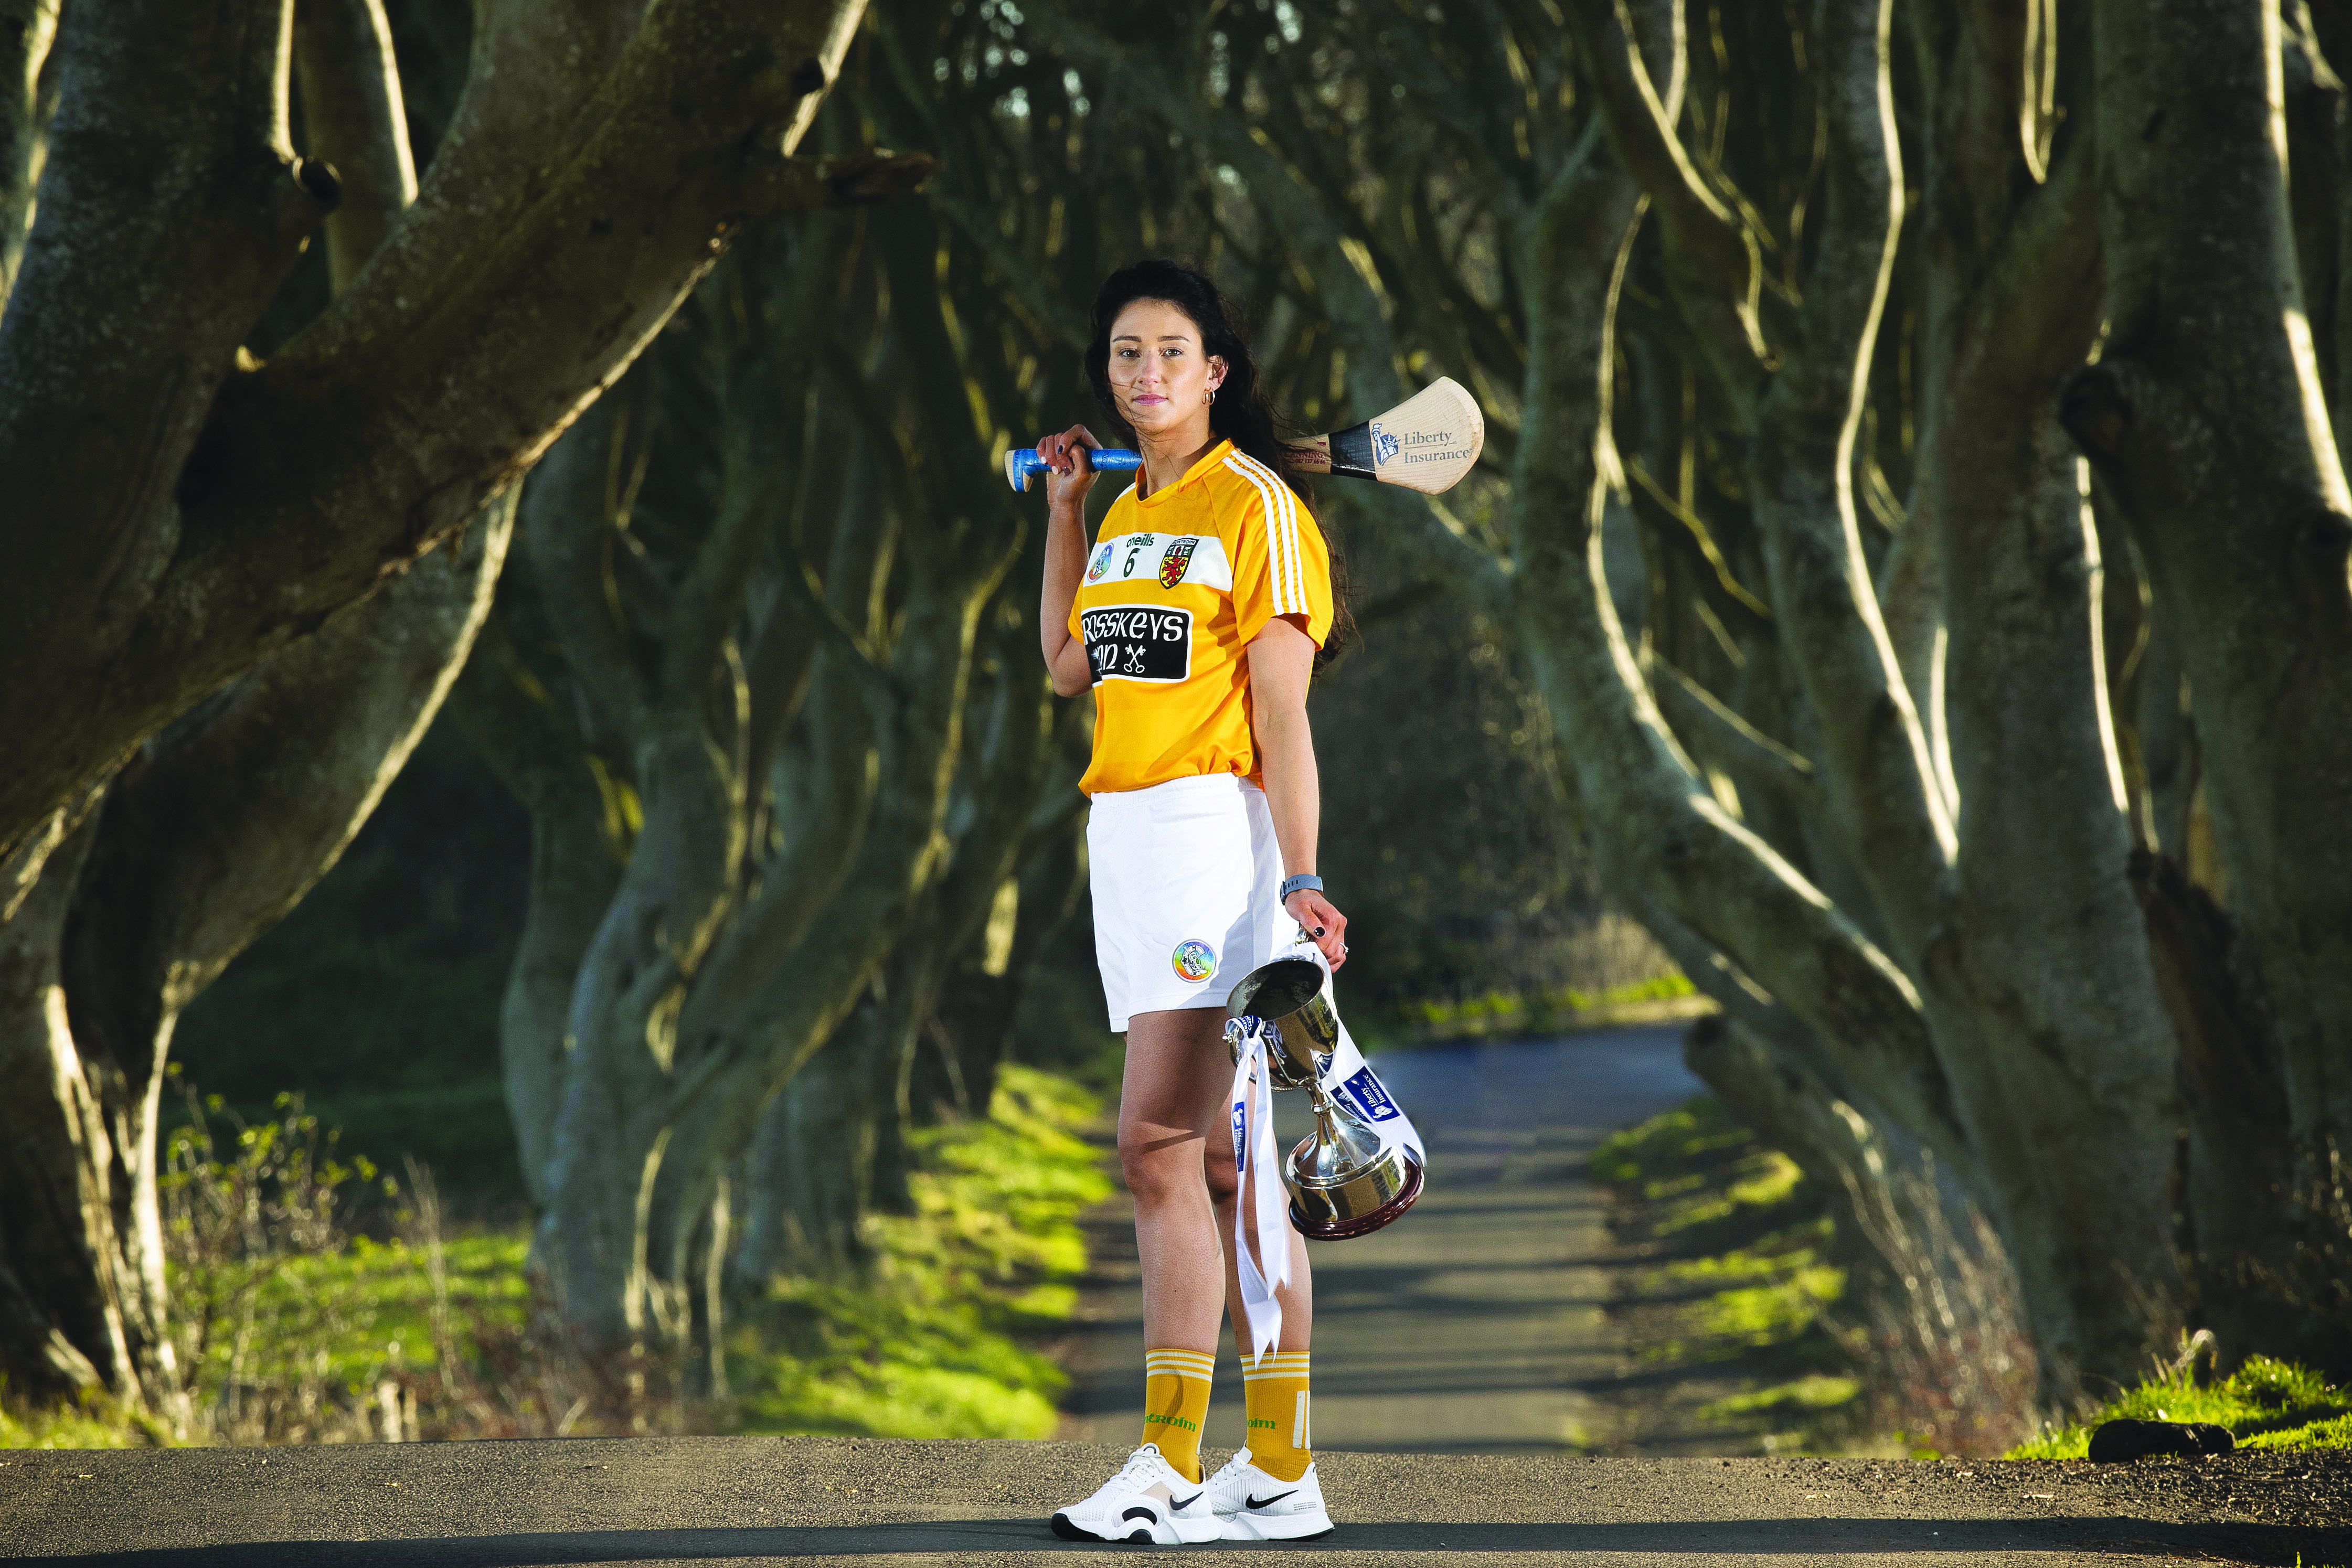 Antrim captain Maeve Connolly will be hoping to get her hands on the Jack McGrath Cup again on Saturday when the Saffrons meet Down in the All-Ireland Intermediate Camogie final at Kingspan Breffni Park 